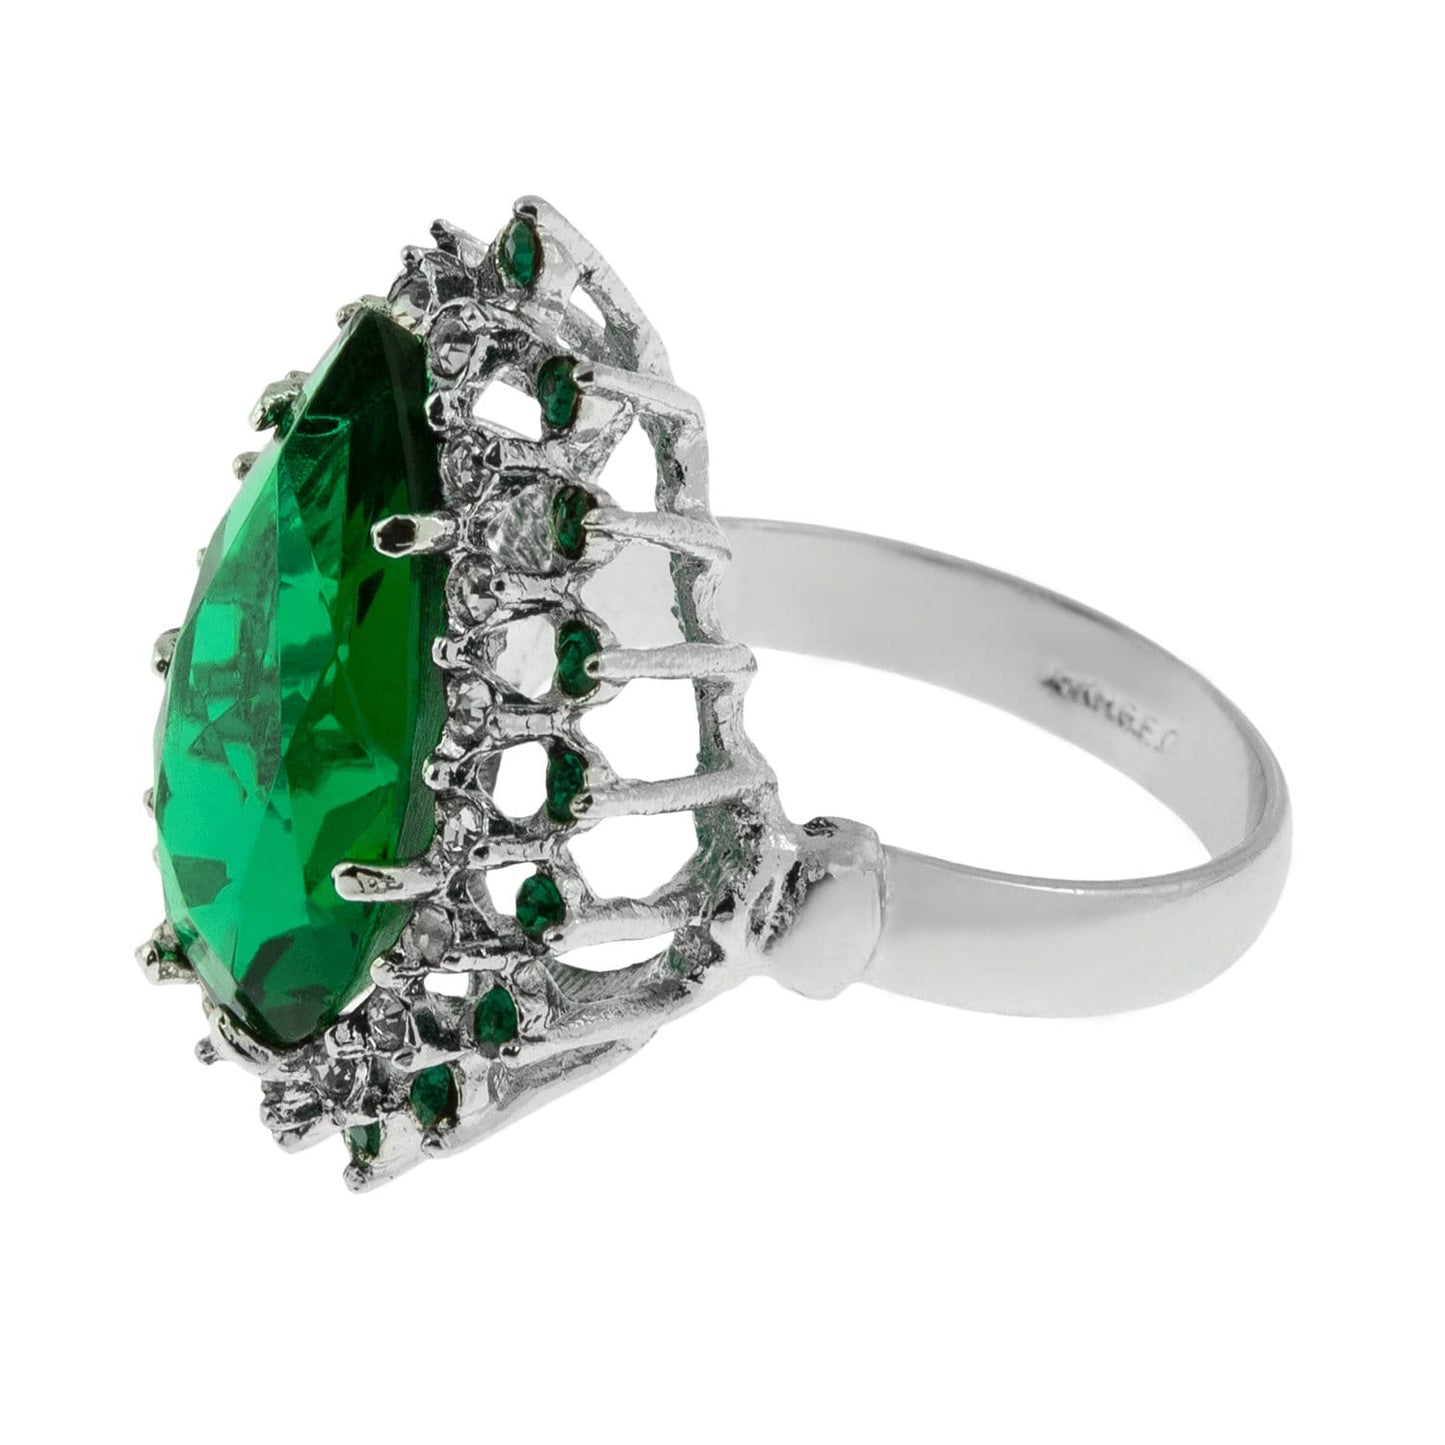 Victorian Emerald and Clear Swarovski Crystals 18k White Gold Silver Cocktail Ring Womans Jewelry #R212 - Limited Stock - Never Worn